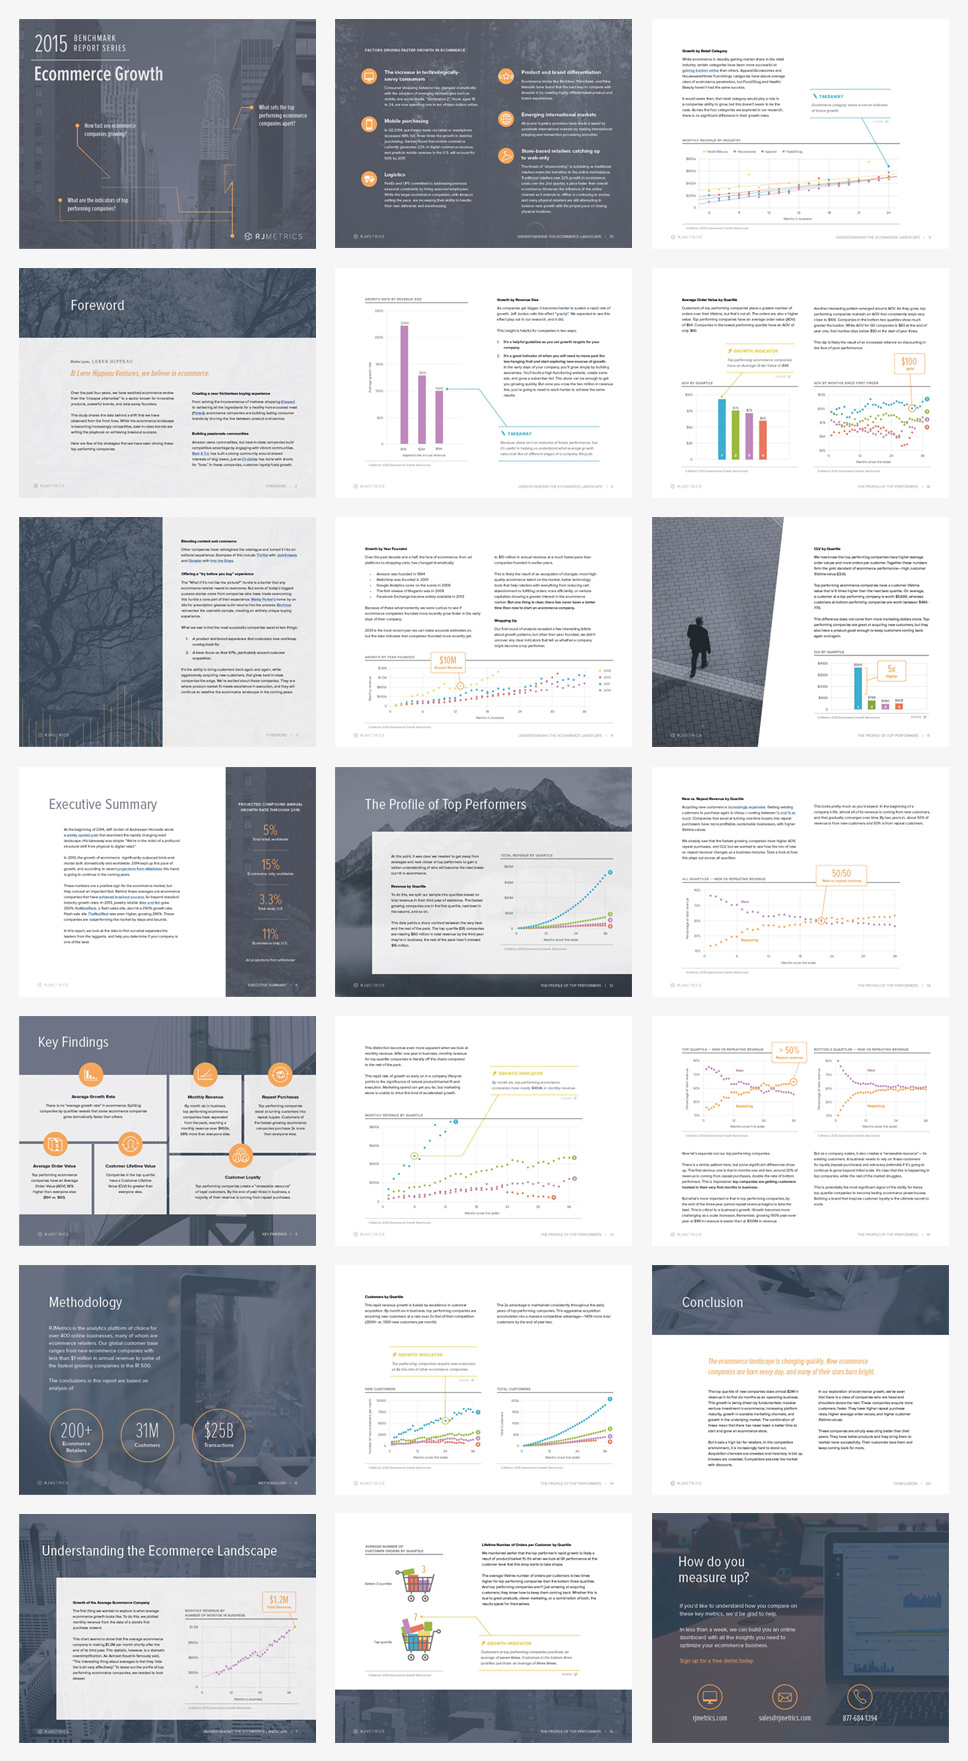 Data data visualization report BENCHMARK annual report growth Ecommerce business business intelligence analytics